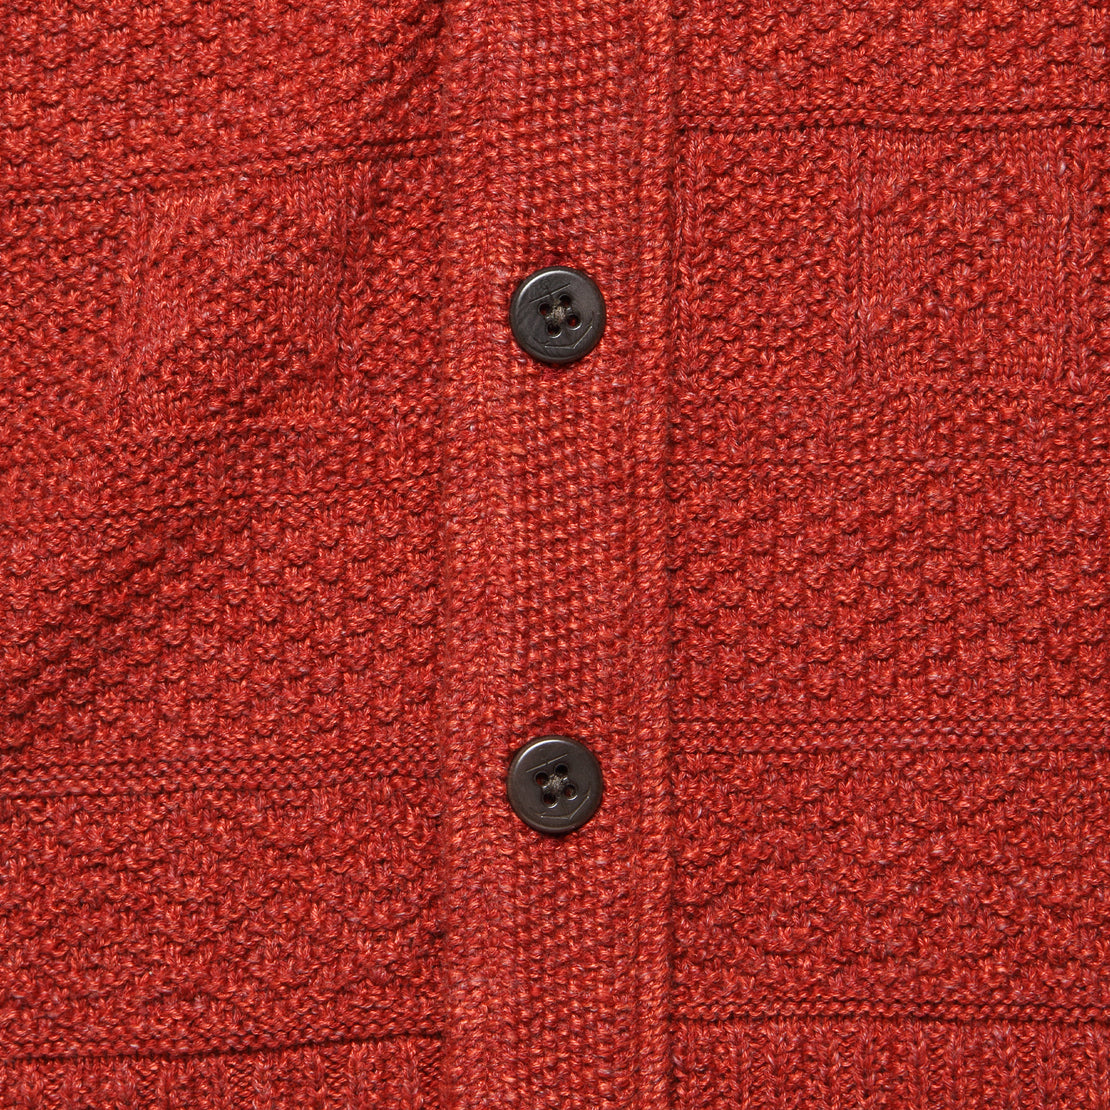 CPO Guernsey Stitch Workshirt - Faded Red Heather - RRL - STAG Provisions - Tops - L/S Woven - Overshirt